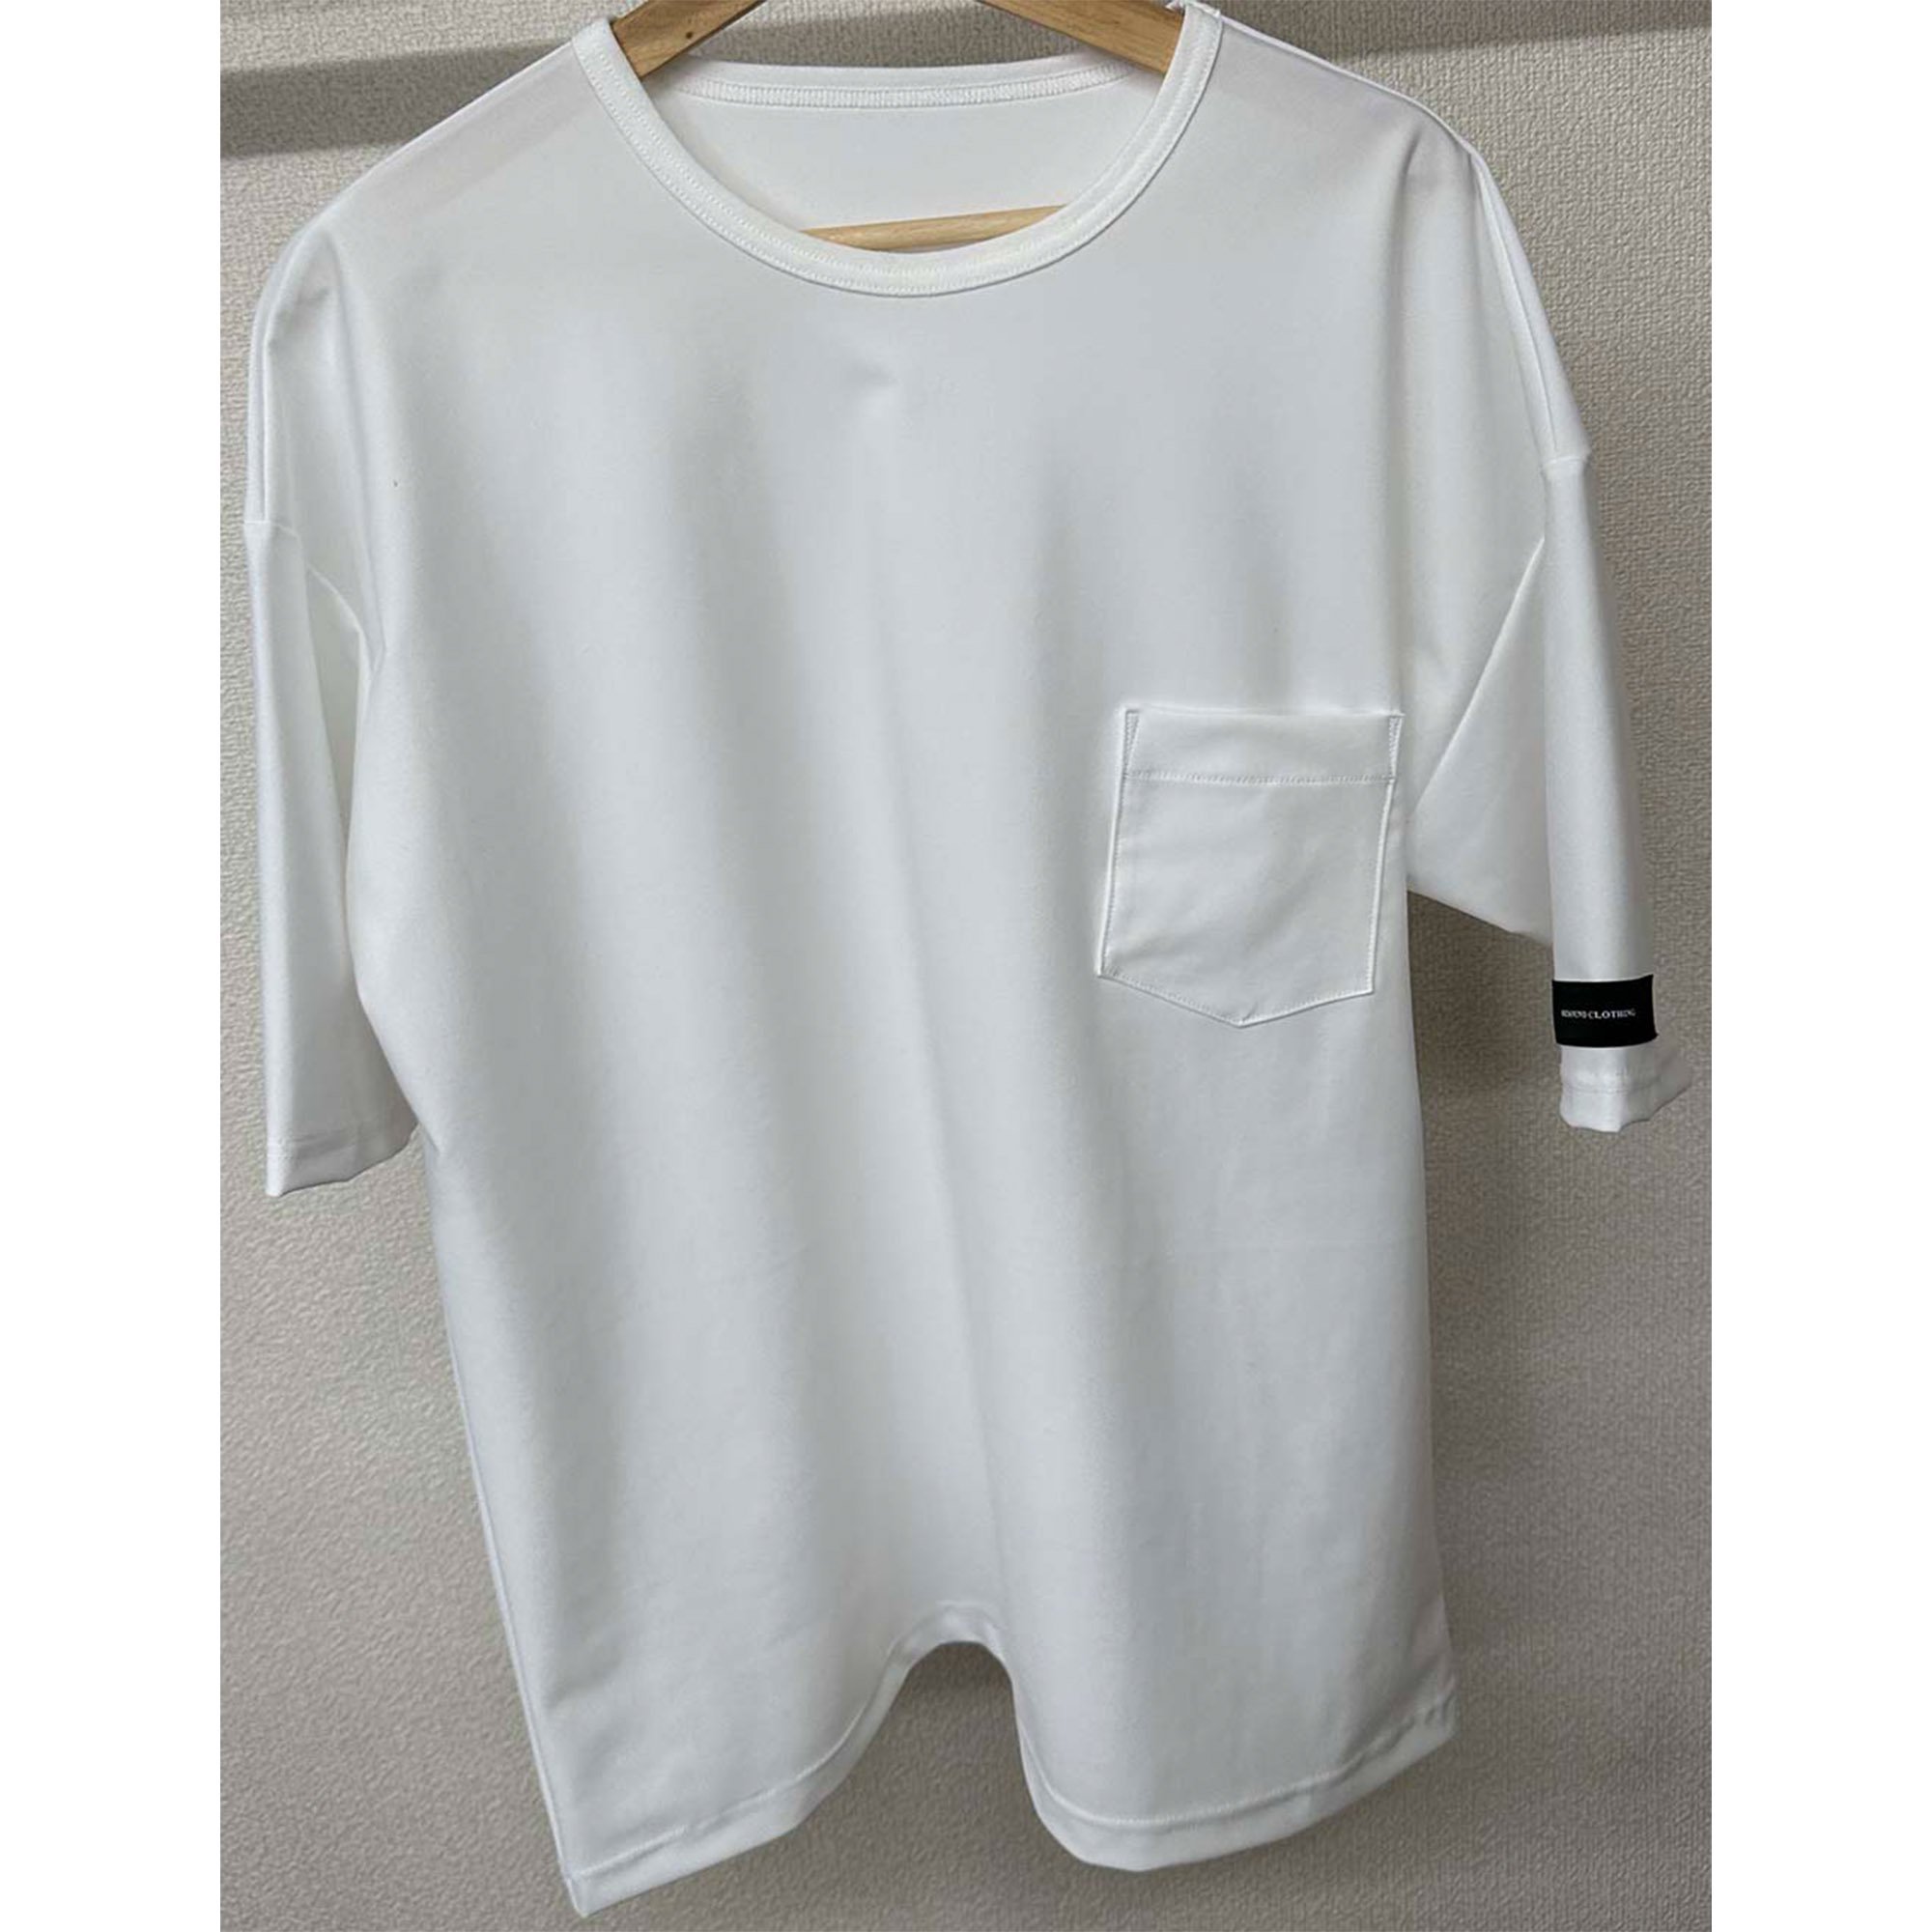 <img class='new_mark_img1' src='https://img.shop-pro.jp/img/new/icons1.gif' style='border:none;display:inline;margin:0px;padding:0px;width:auto;' />tricot pocket TEE WHITE